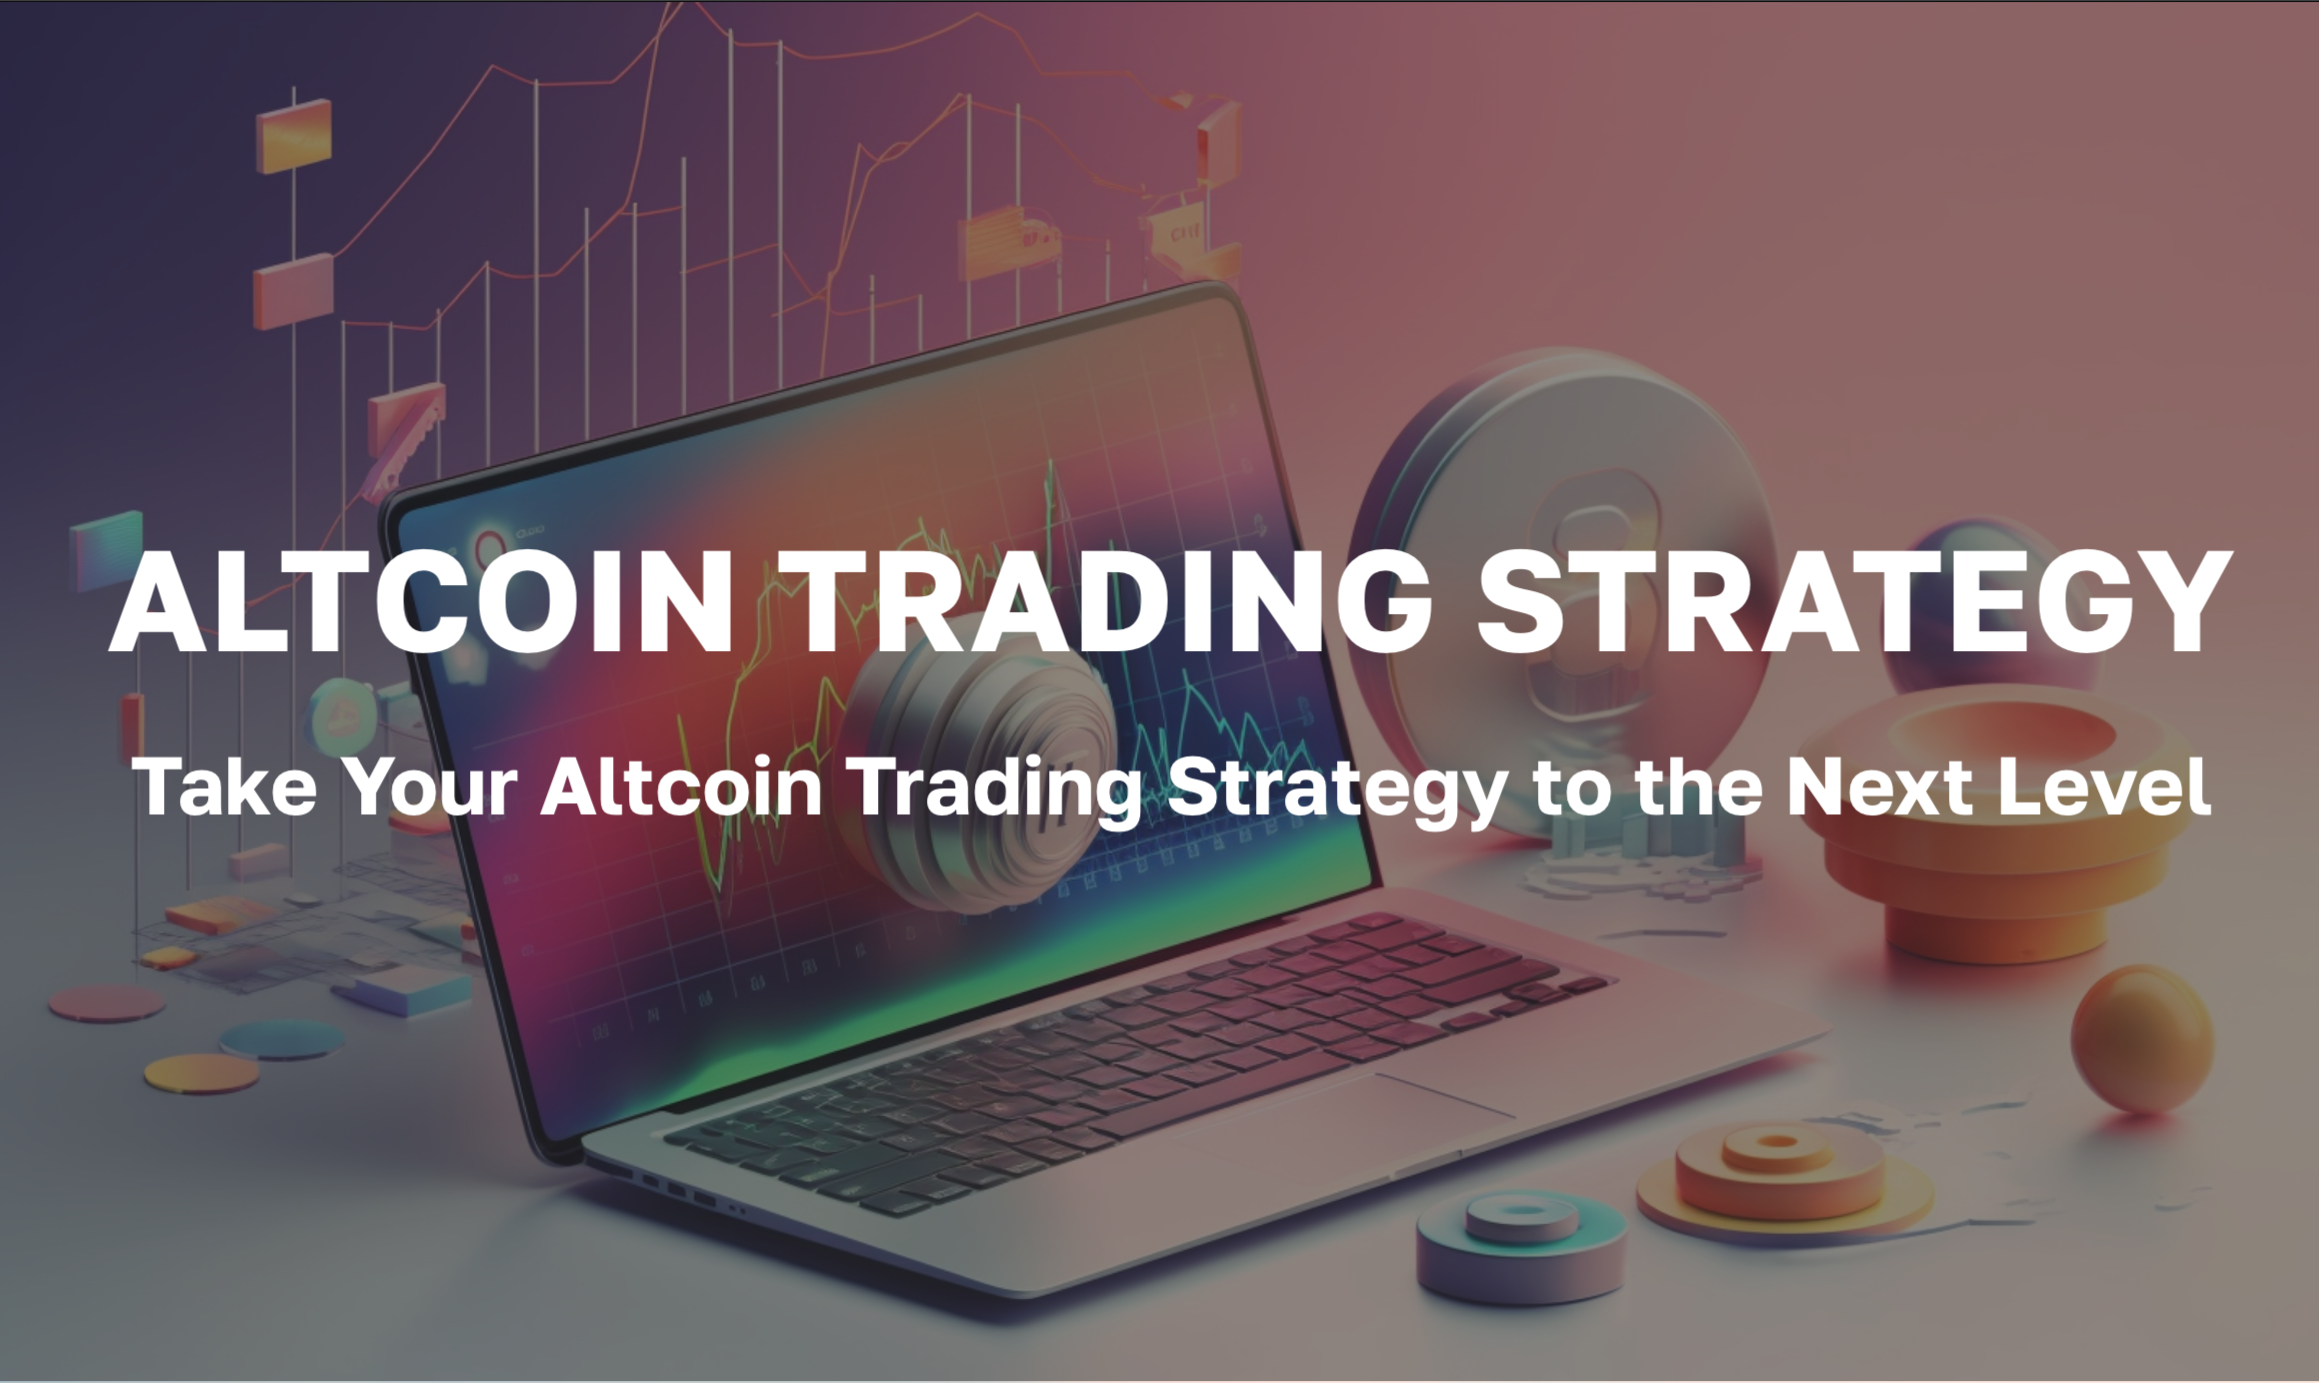 Take Your Altcoin Trading Strategy to the Next Level with Moralis Money